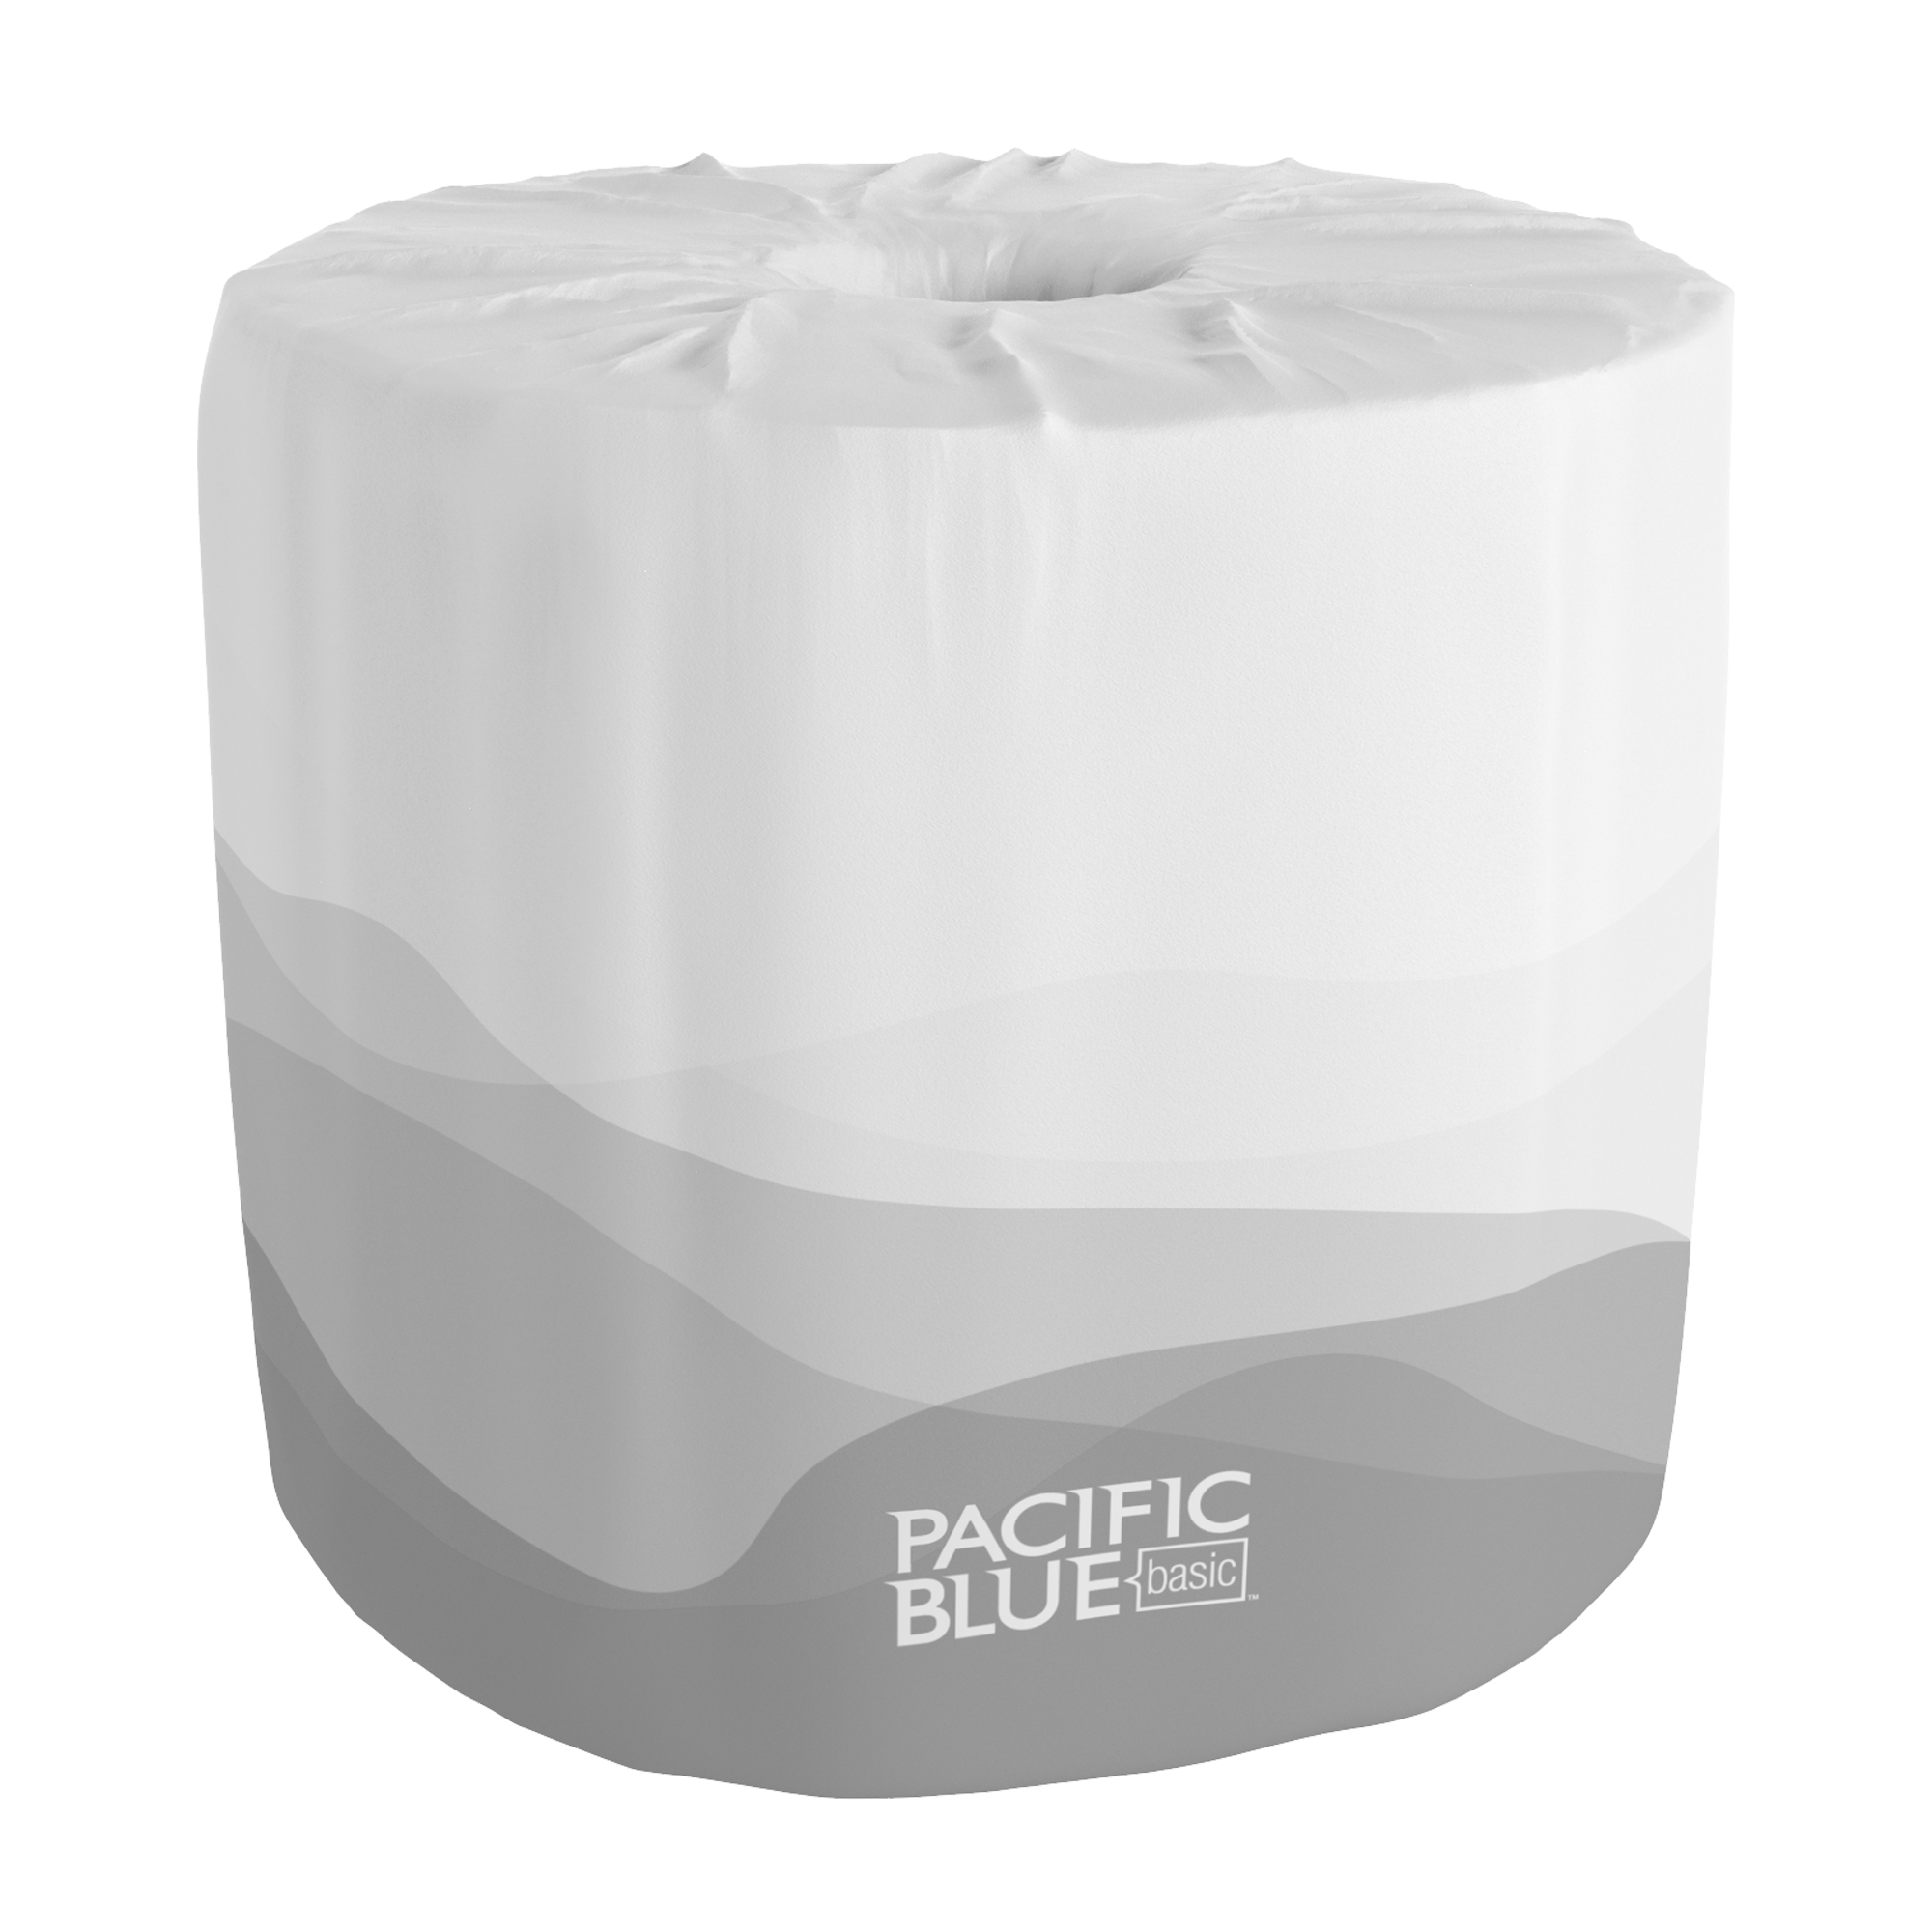 Georgia Pacific Professional Pacific Blue Basic Bathroom Tissue, Septic Safe, 2-Ply, White, 550 Sheets/Roll, 80 Rolls/Carton -GPC1988001 - image 1 of 7